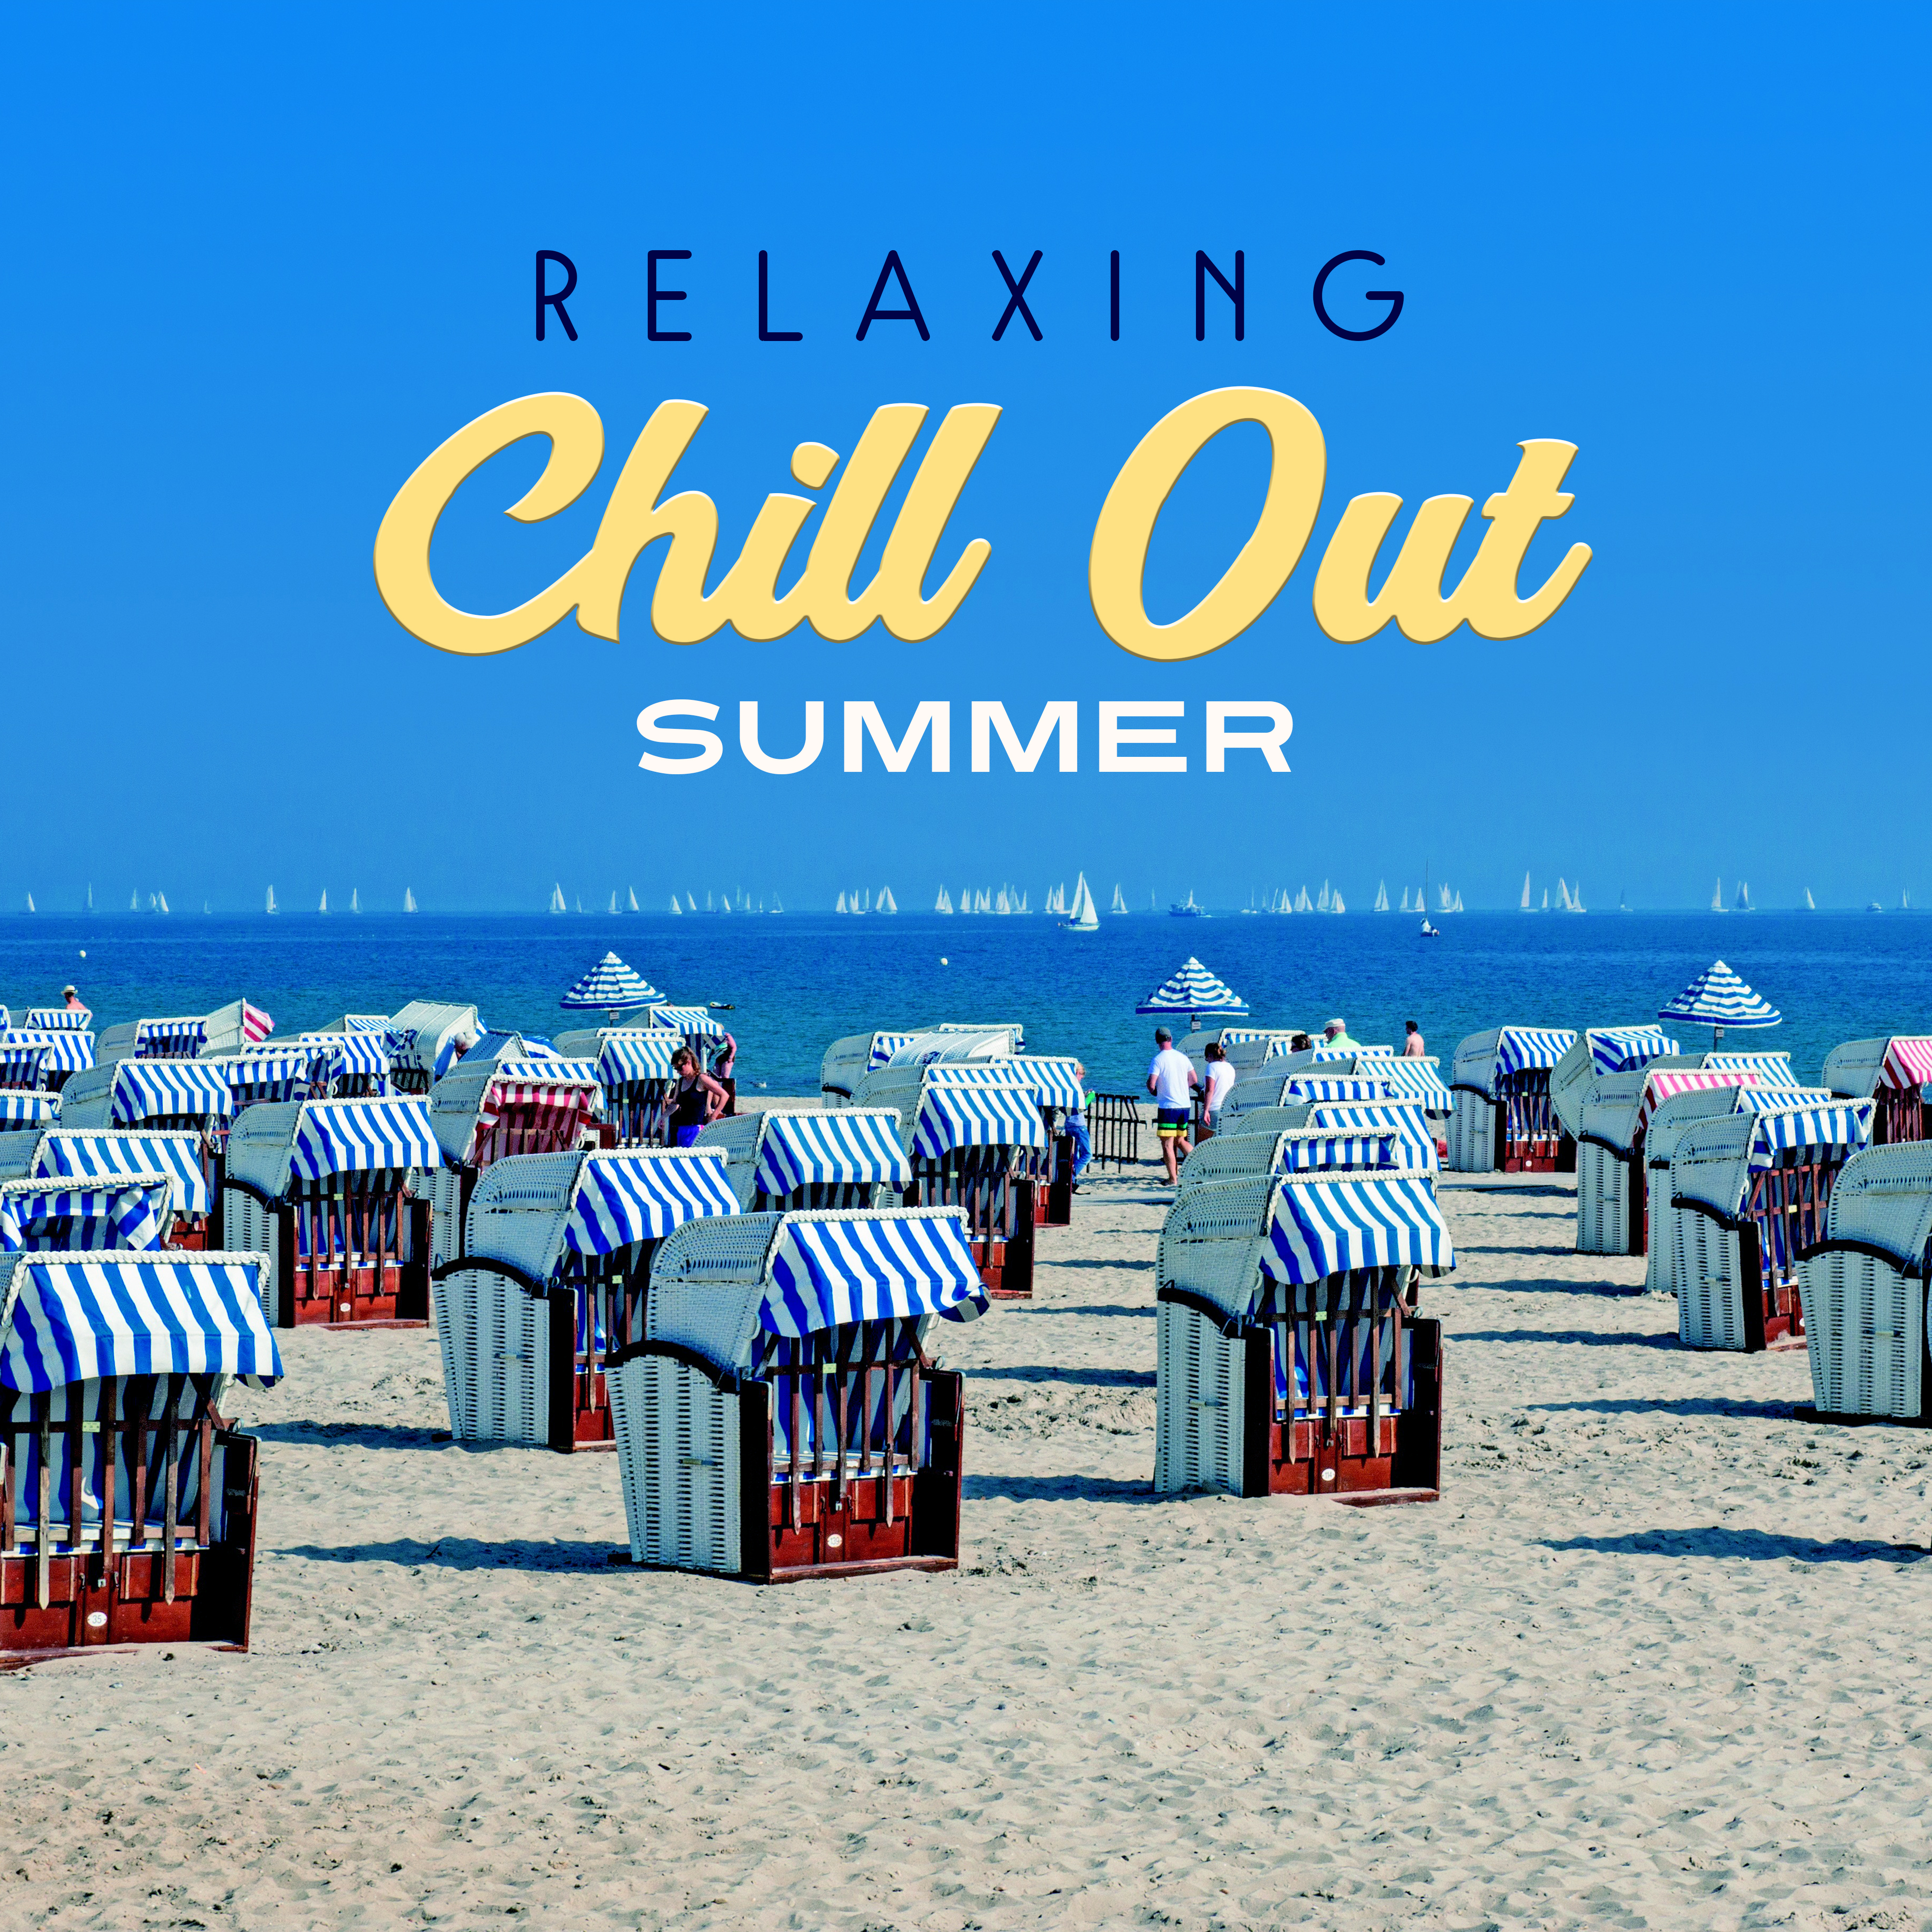 Relaxing Chill Out Summer  Beach Relaxation, Summer Beats, Deep Rest, Chill Out Lounge